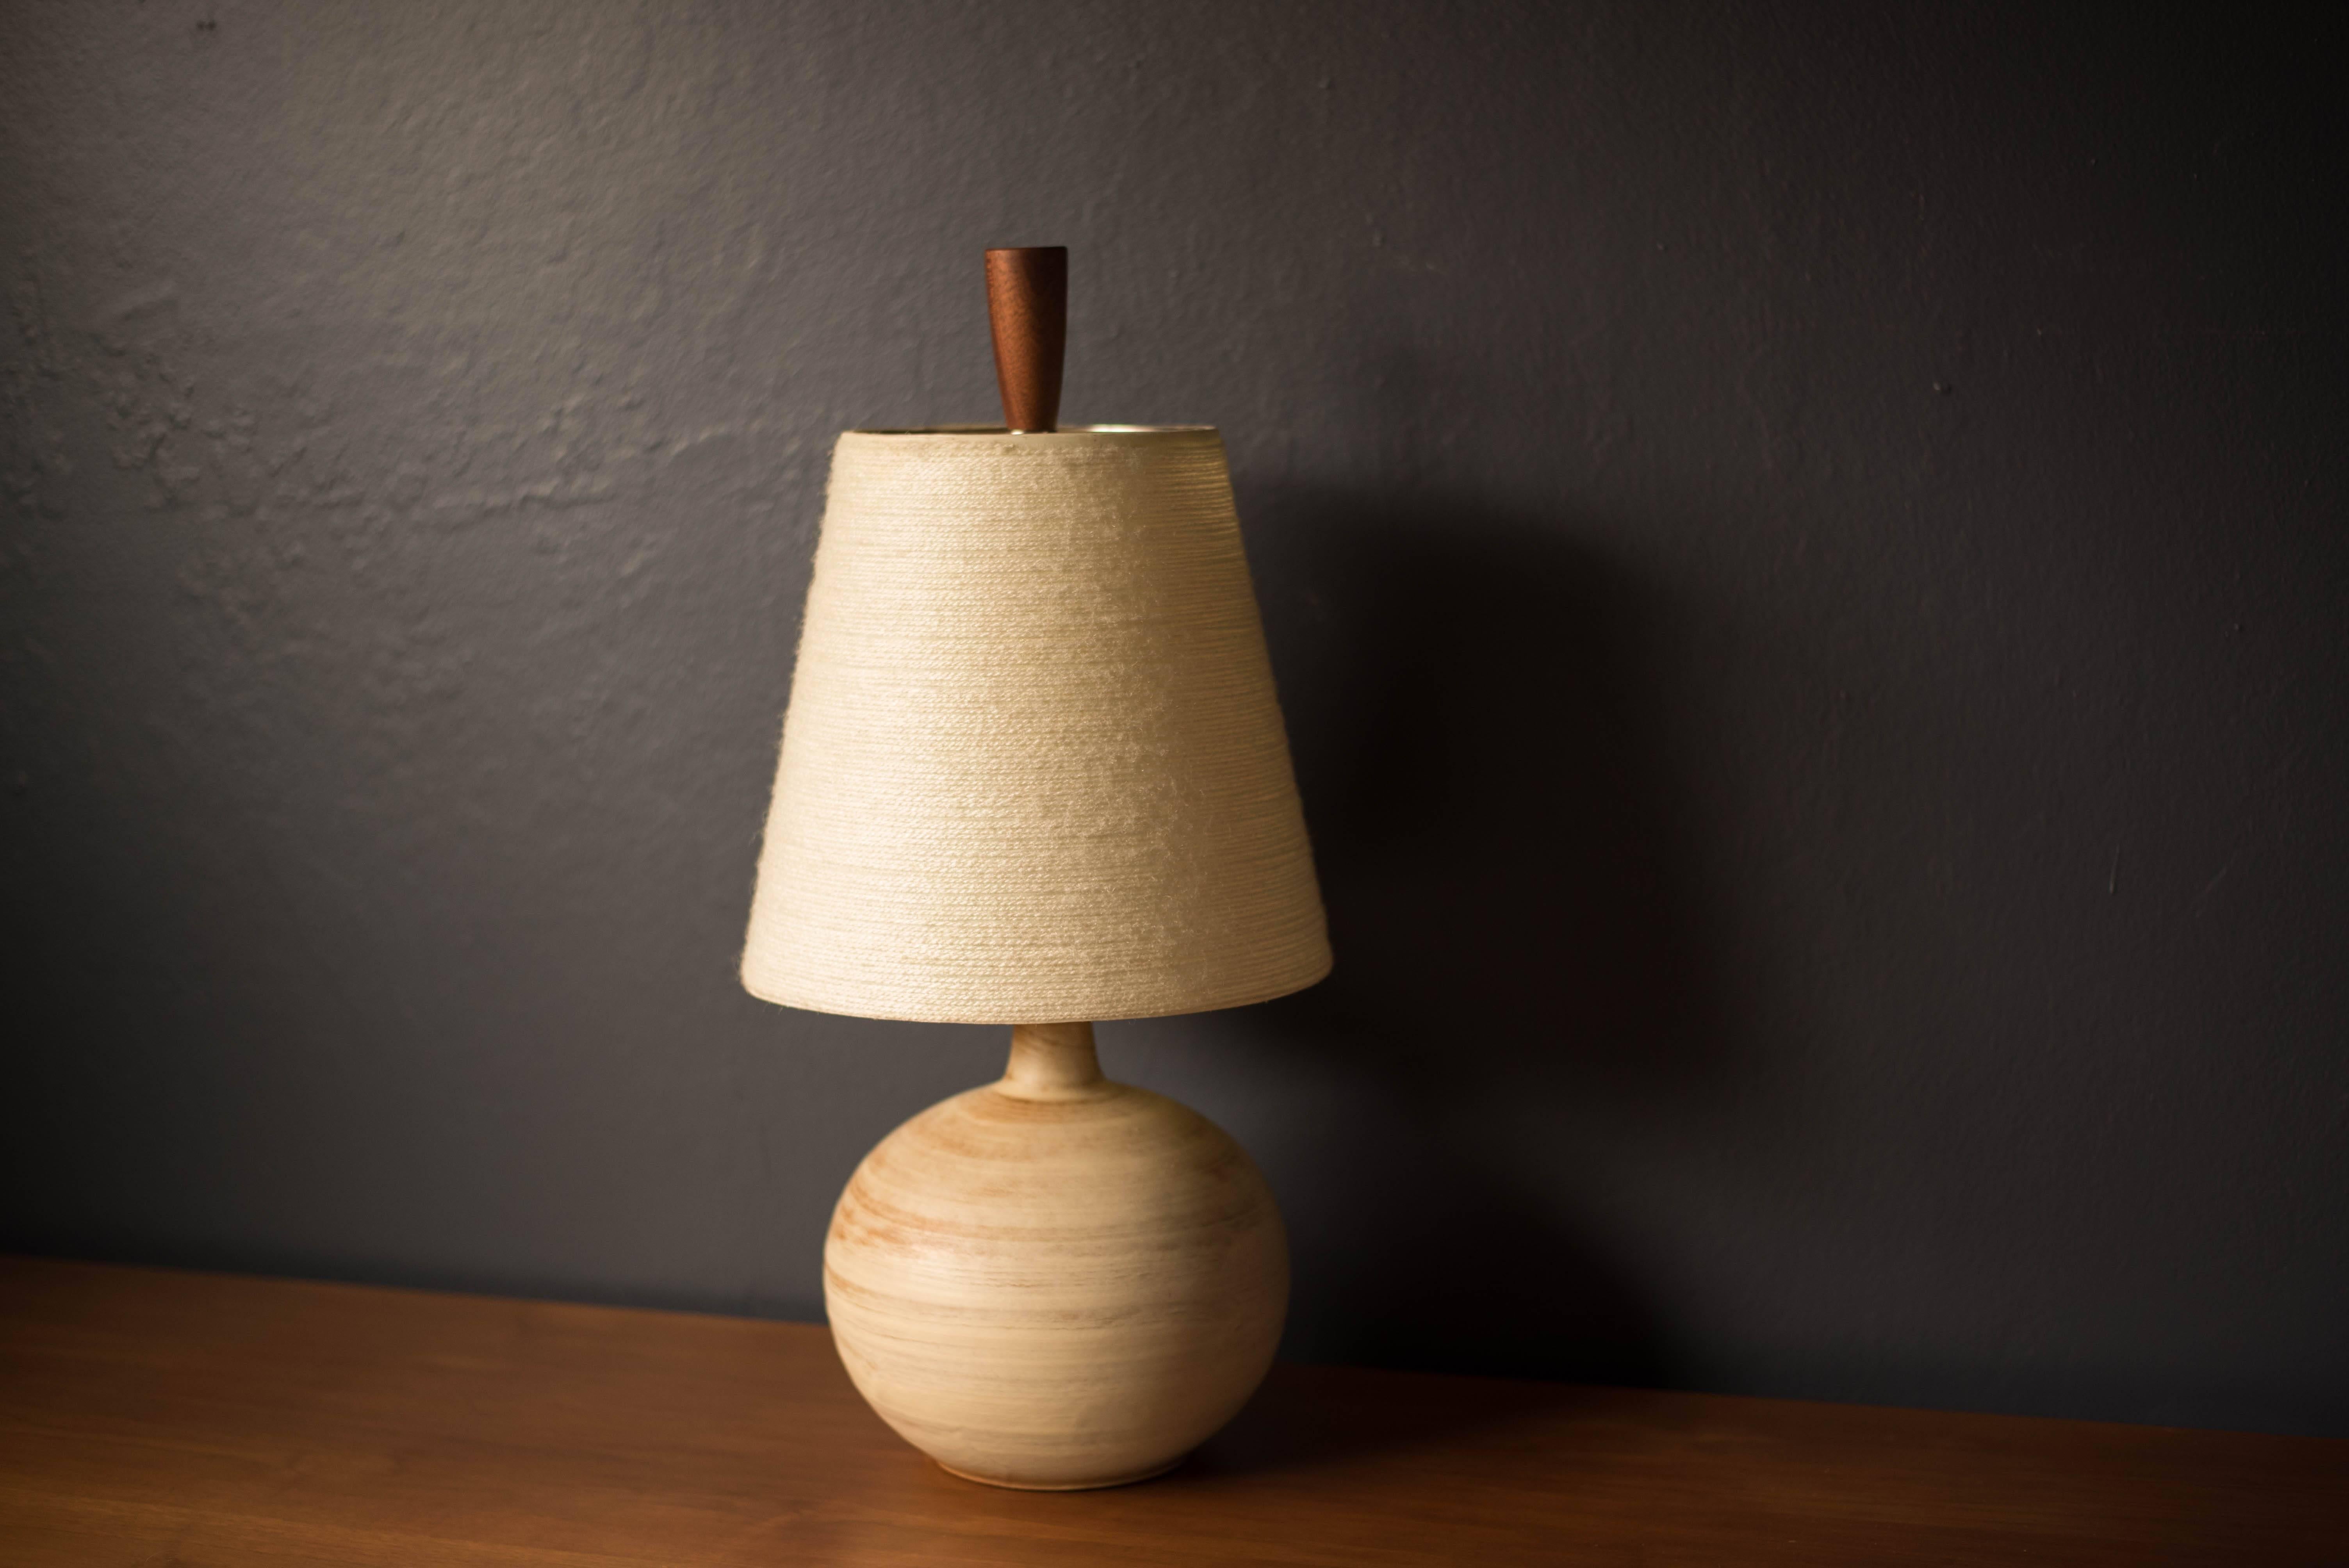 Mid-Century Modern ceramic table lamp, circa 1960s. This piece displays a neutral tone matte finish and is accessorized with a walnut finial. Includes a fiberglass tapered shade and functions with a three-way switch.